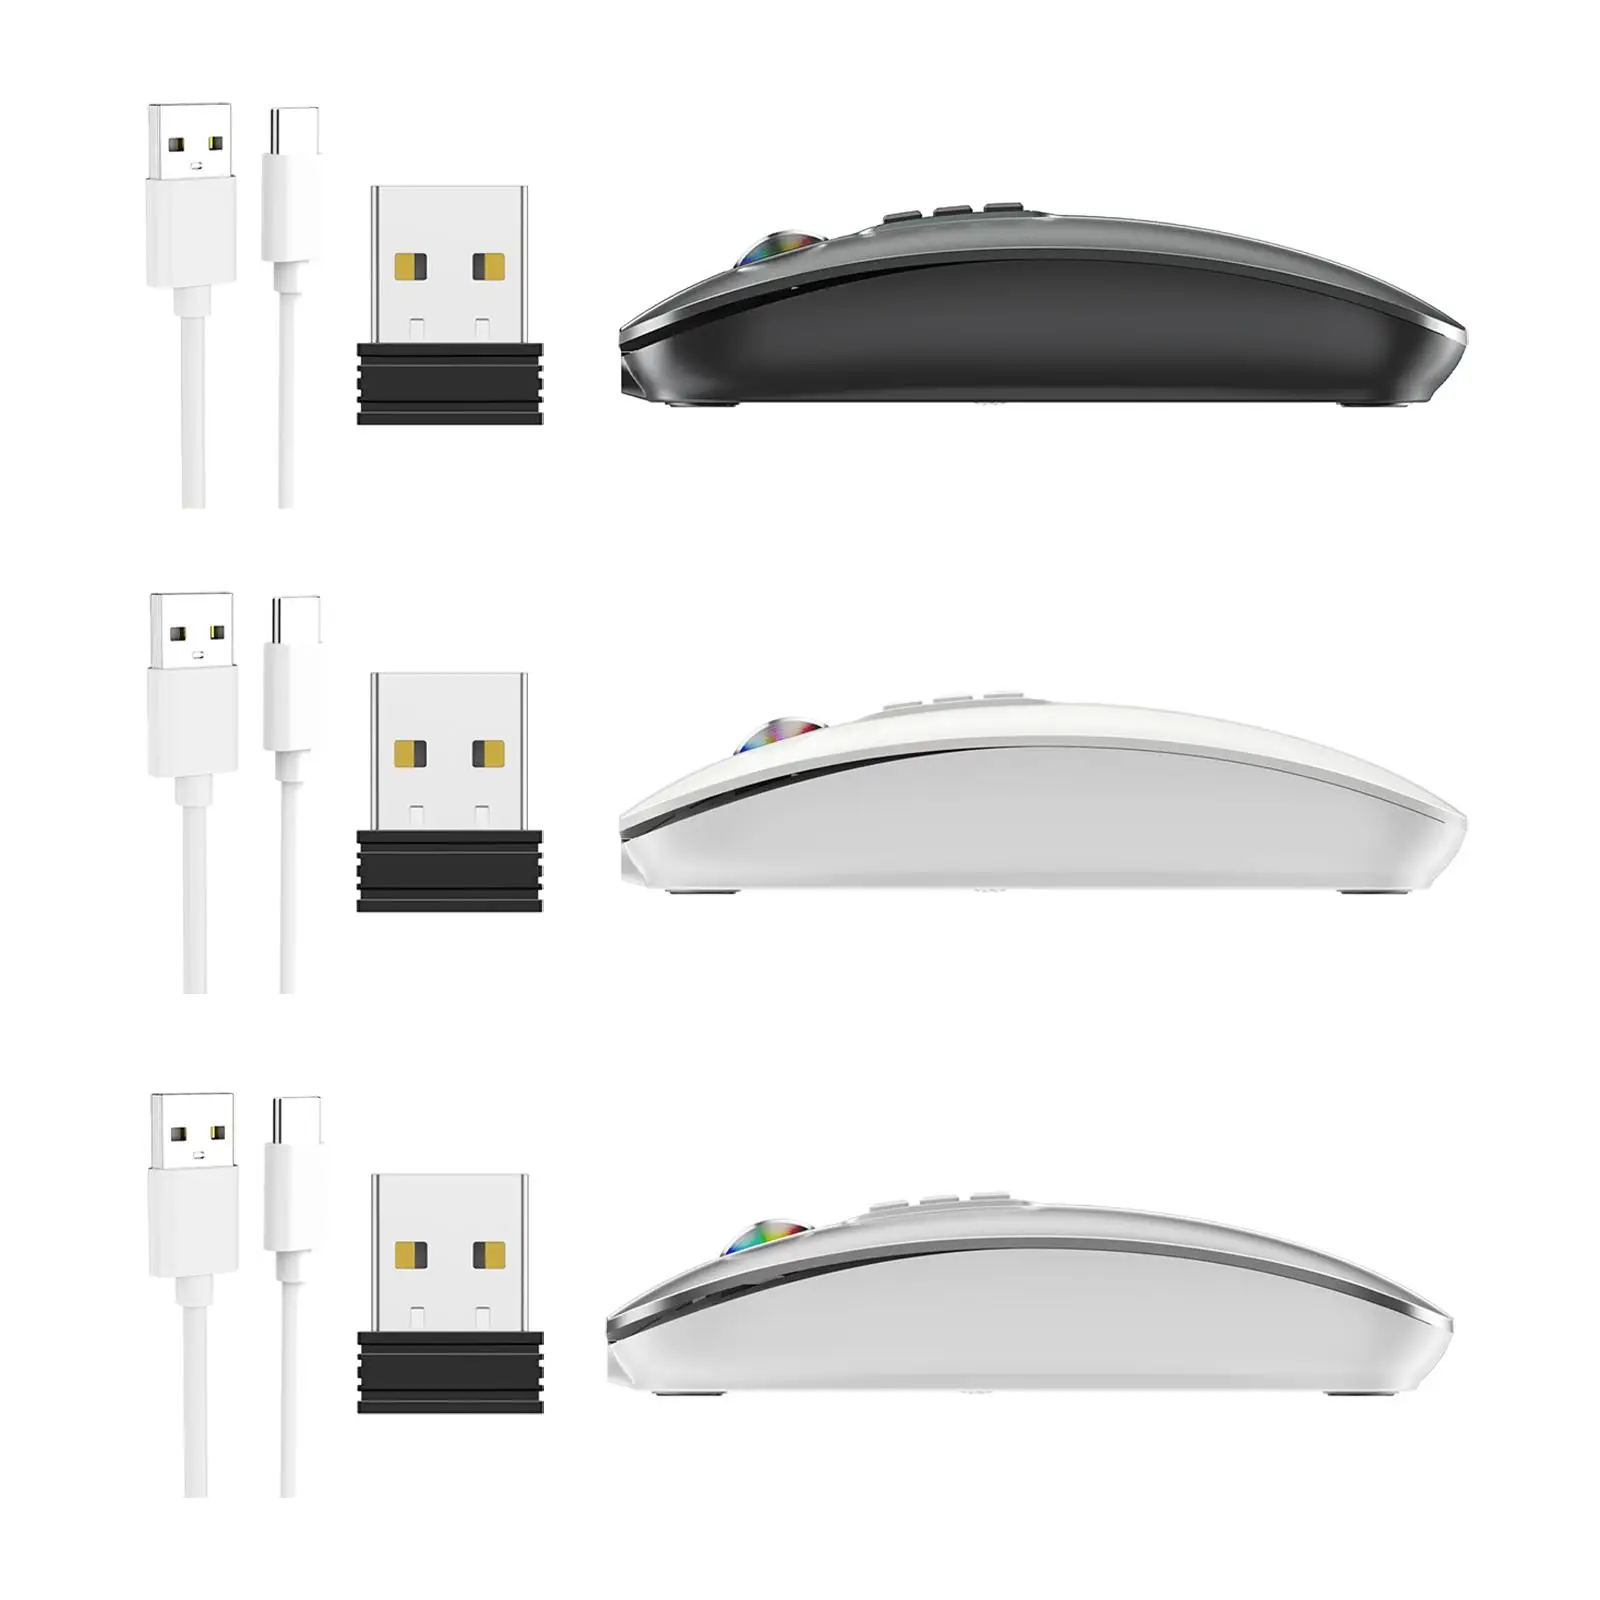 Optical Mice Silent DPI Button with USB Receiver Ergonomic Rechargeable Mini Mouse for Tablet PC Laptop